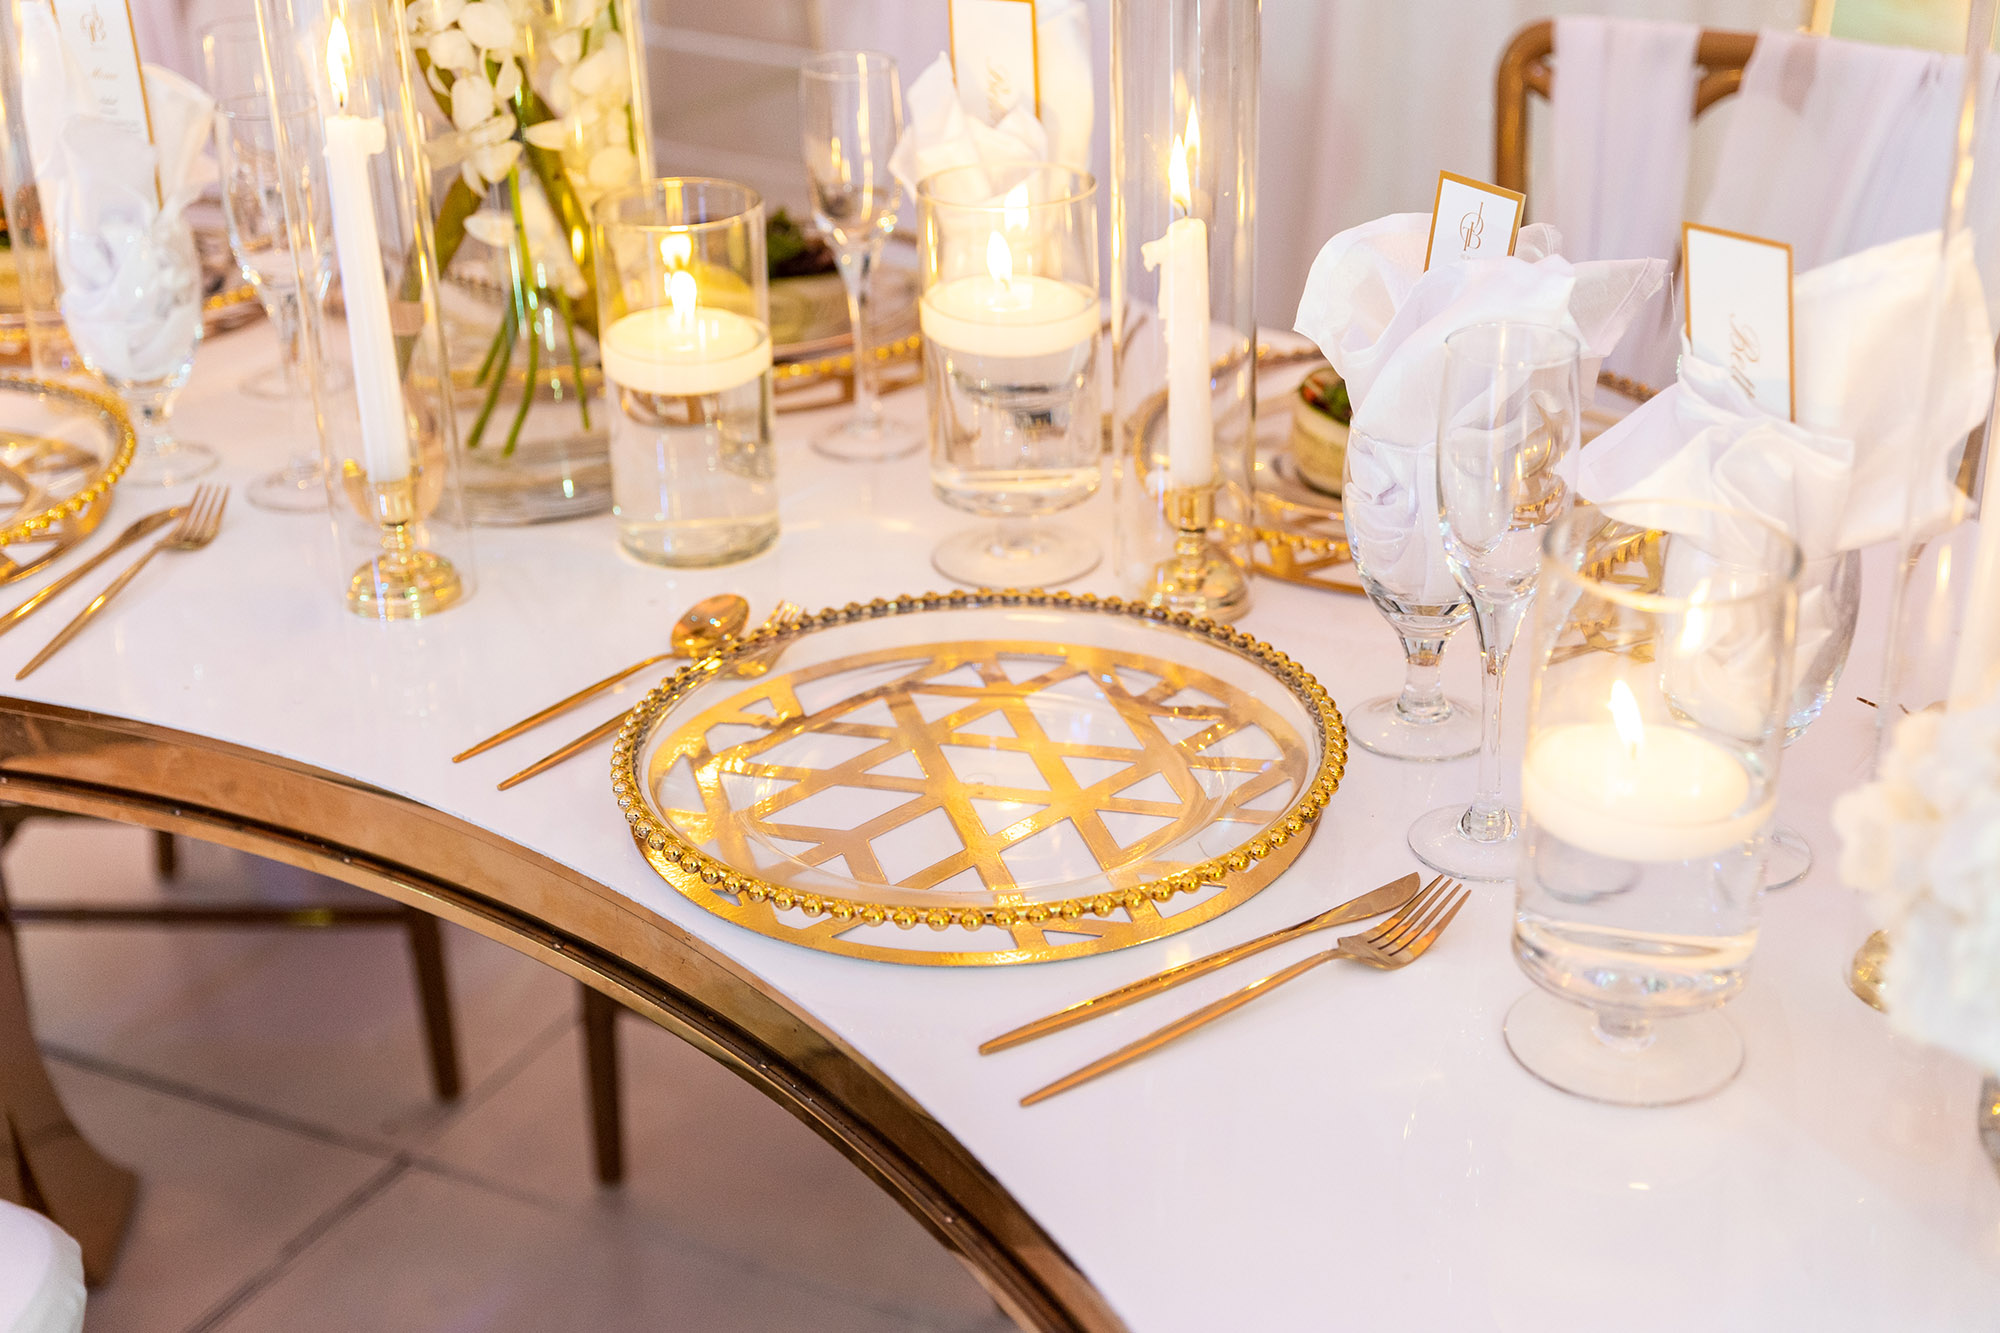 White flower arrangements and floating candles on a table with gold accents on plate settings, silverware, tables and chairs eccessories by ellen www.eccessoriesbyellen.com